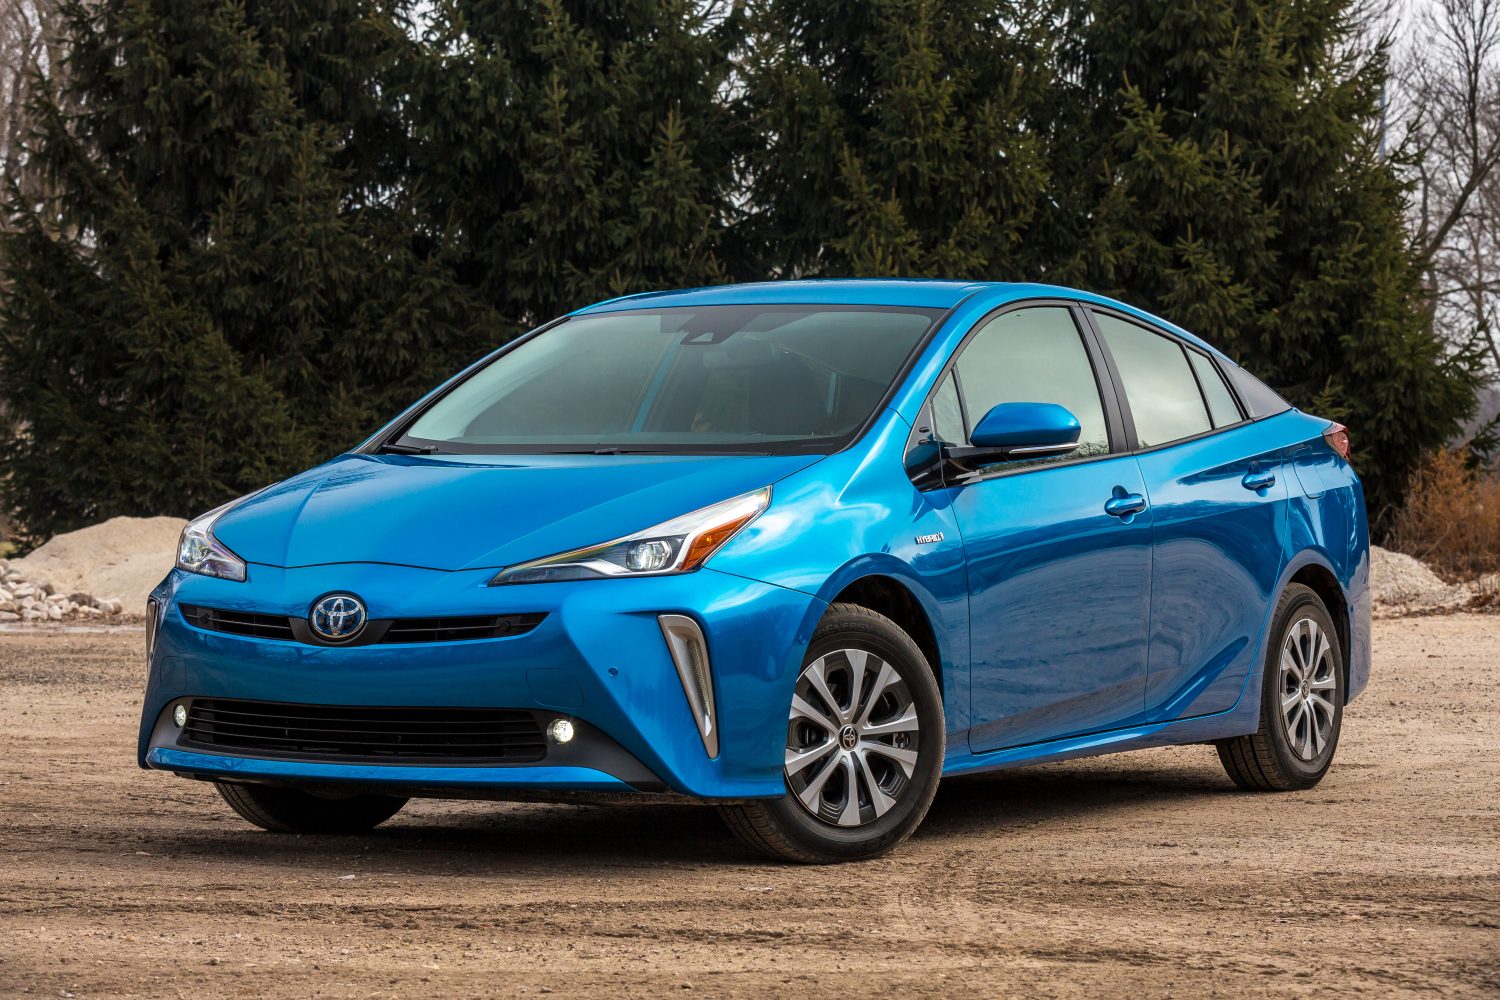 New and Used Toyota Prius Prices, Photos, Reviews, Specs The Car